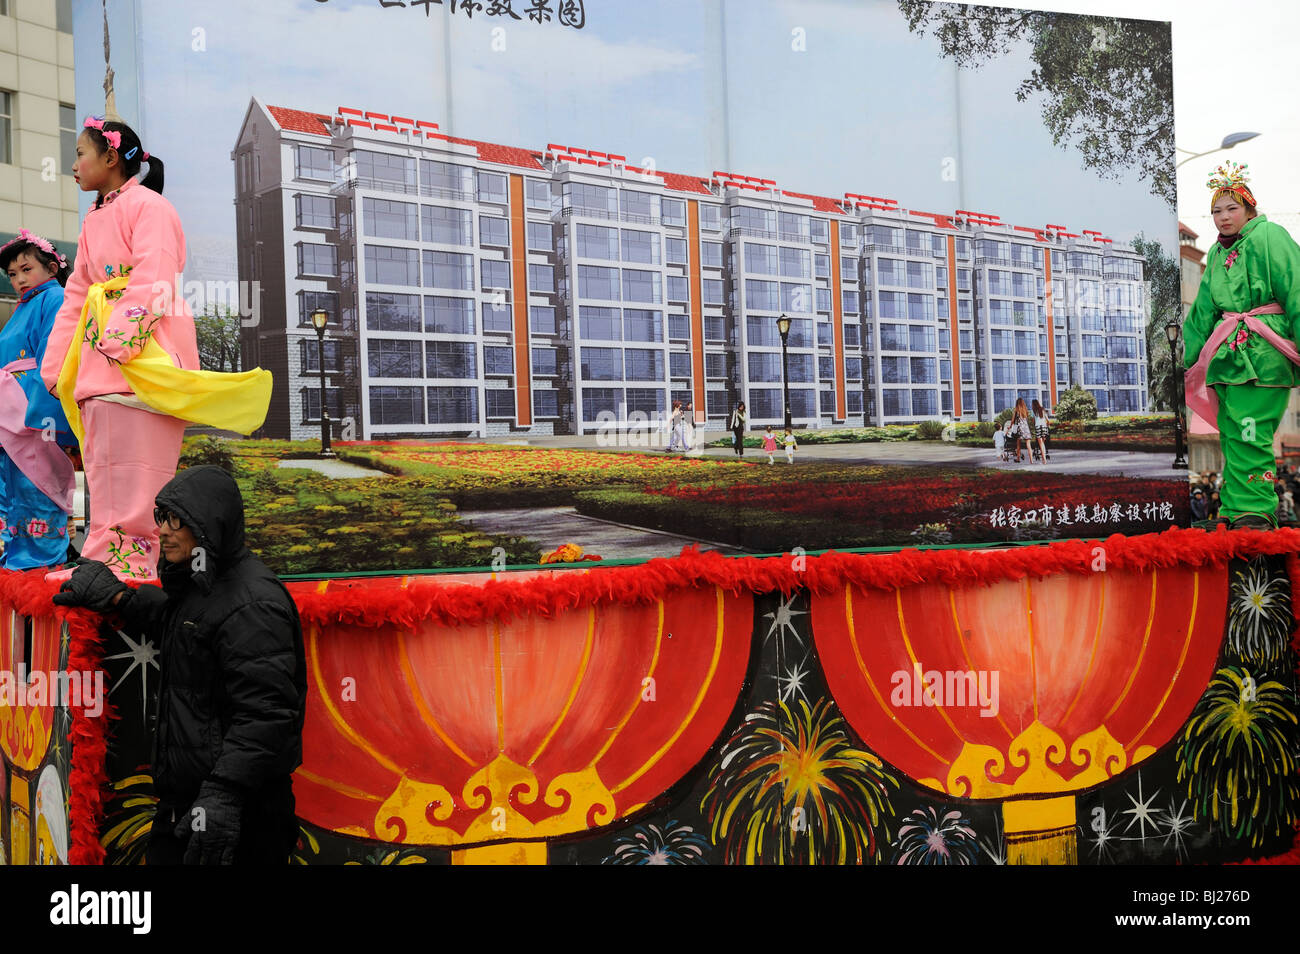 A billboard featuring luxurious apartments on a pageant wagon during the Spring Festival in Yuxian, Hebei, China. 28-Feb-2010 Stock Photo